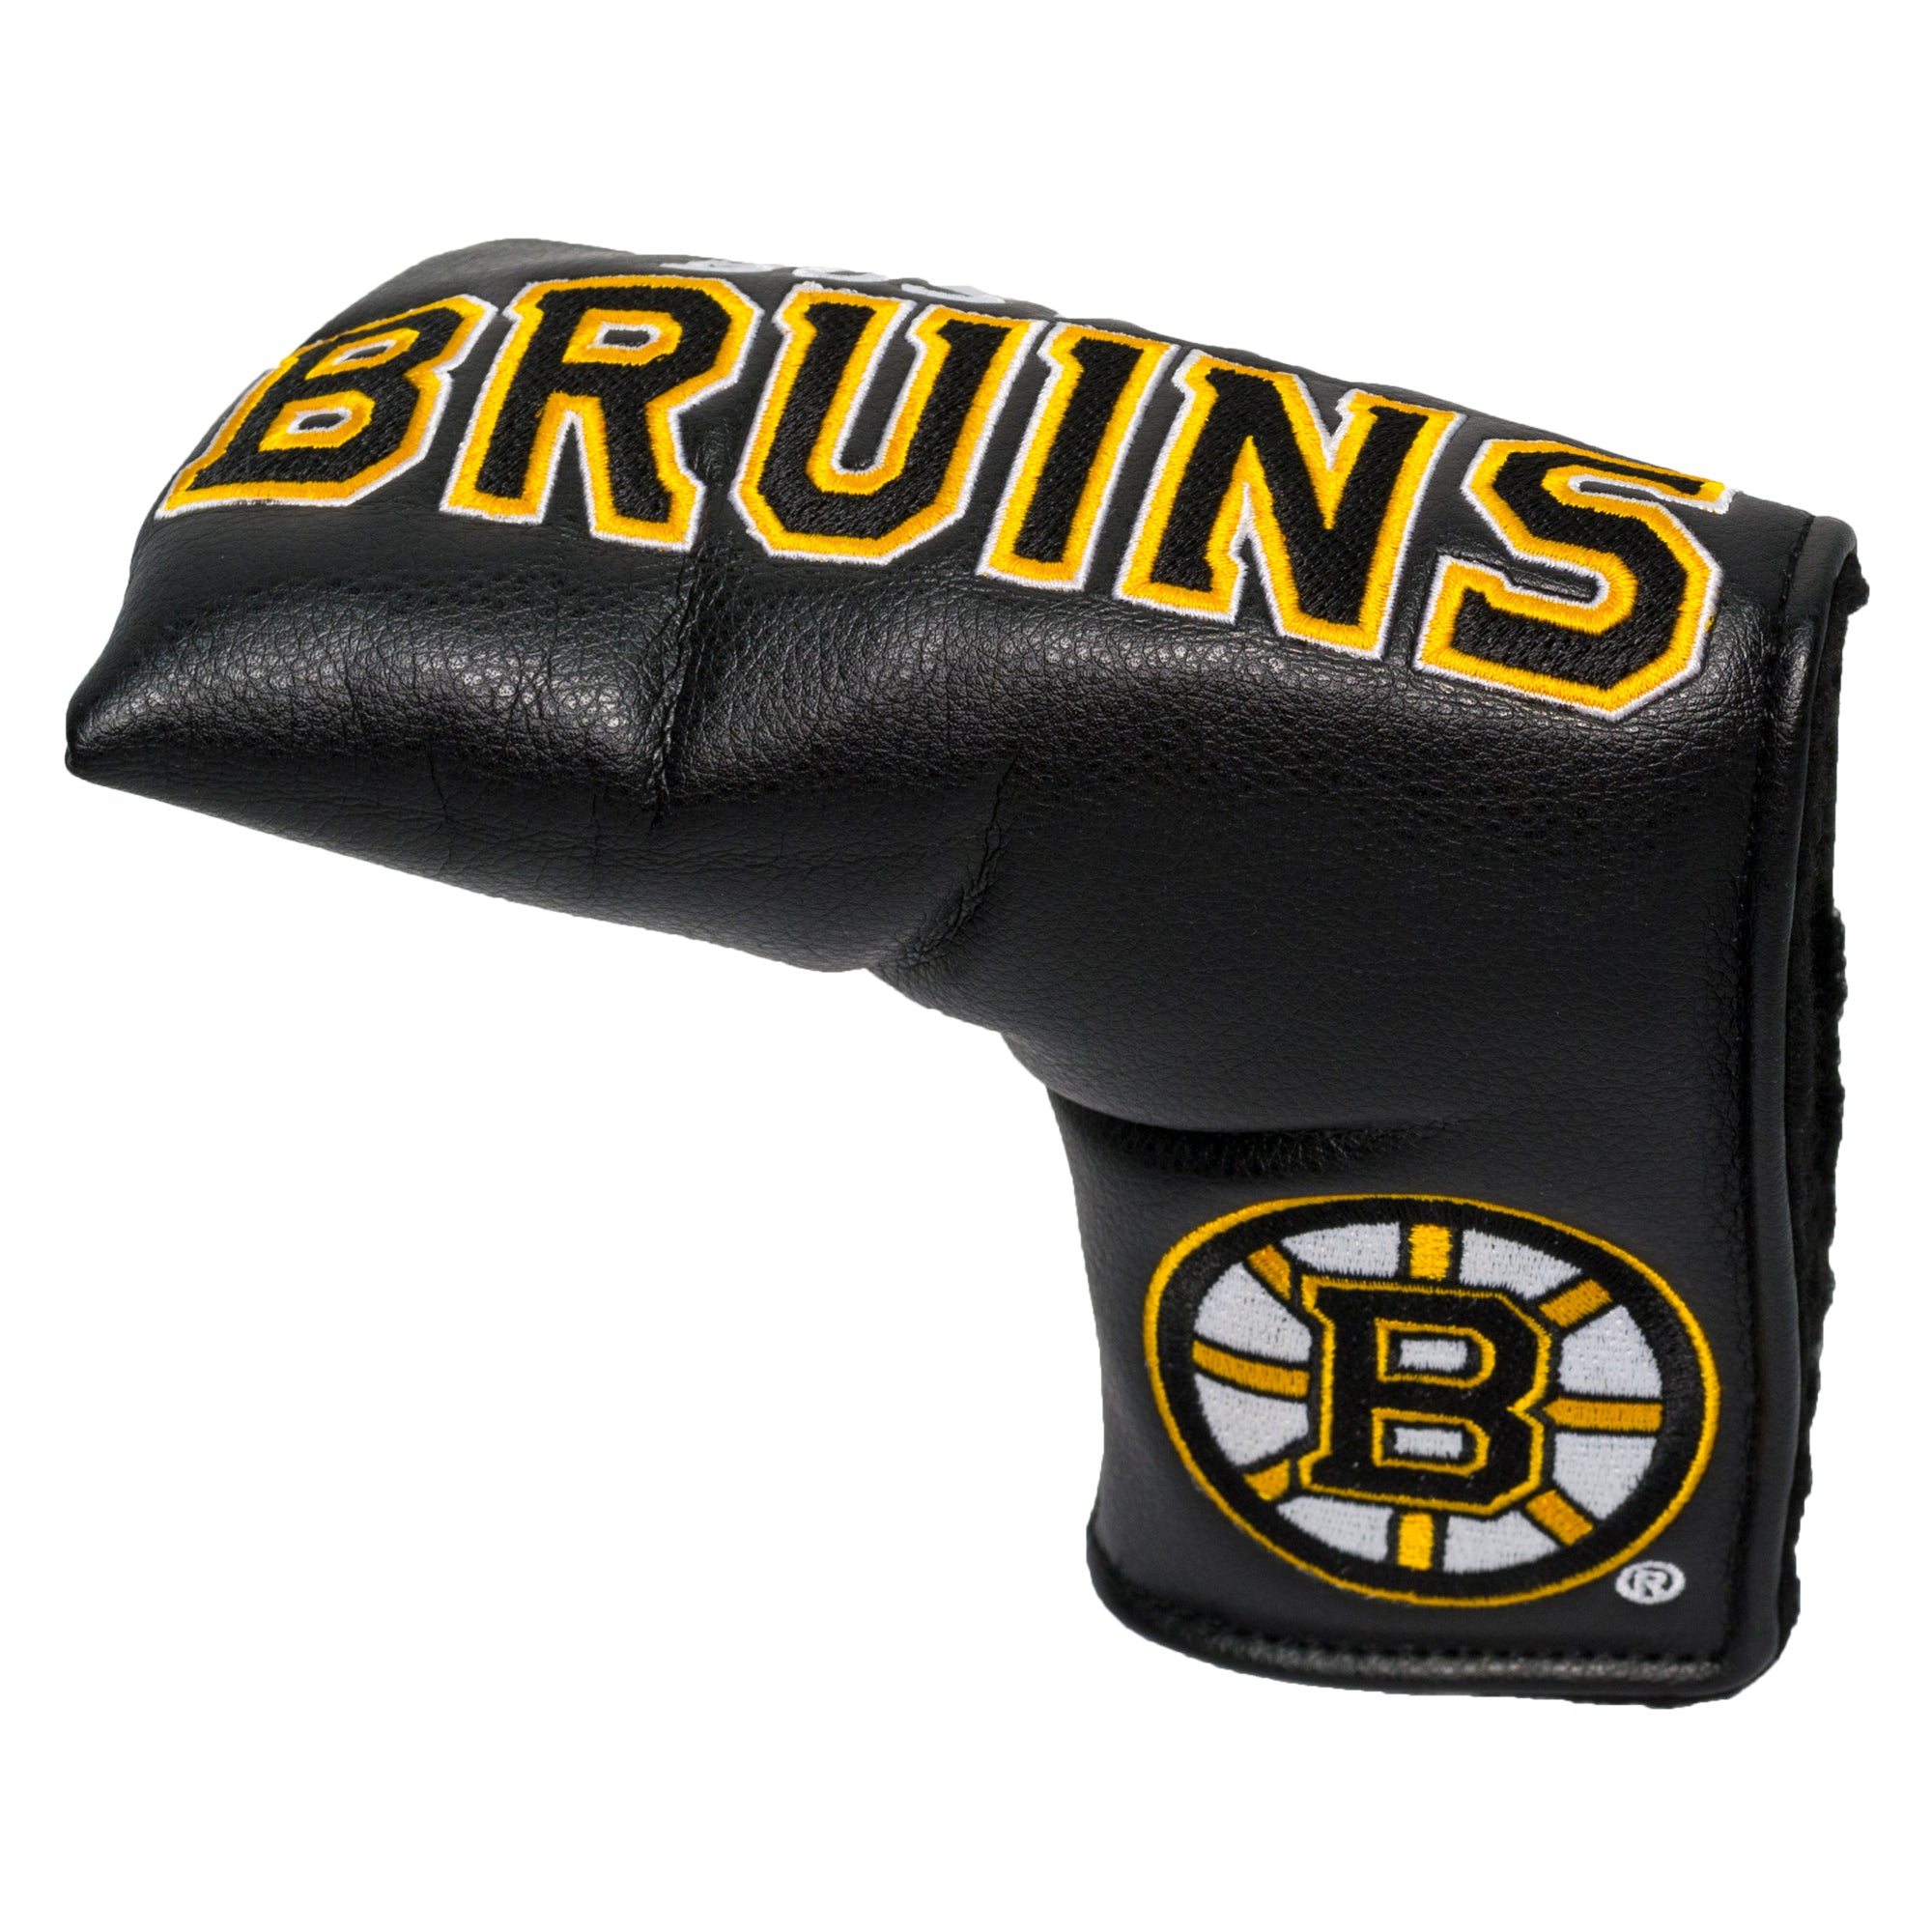 Boston Bruins Tour Blade Putter Cover